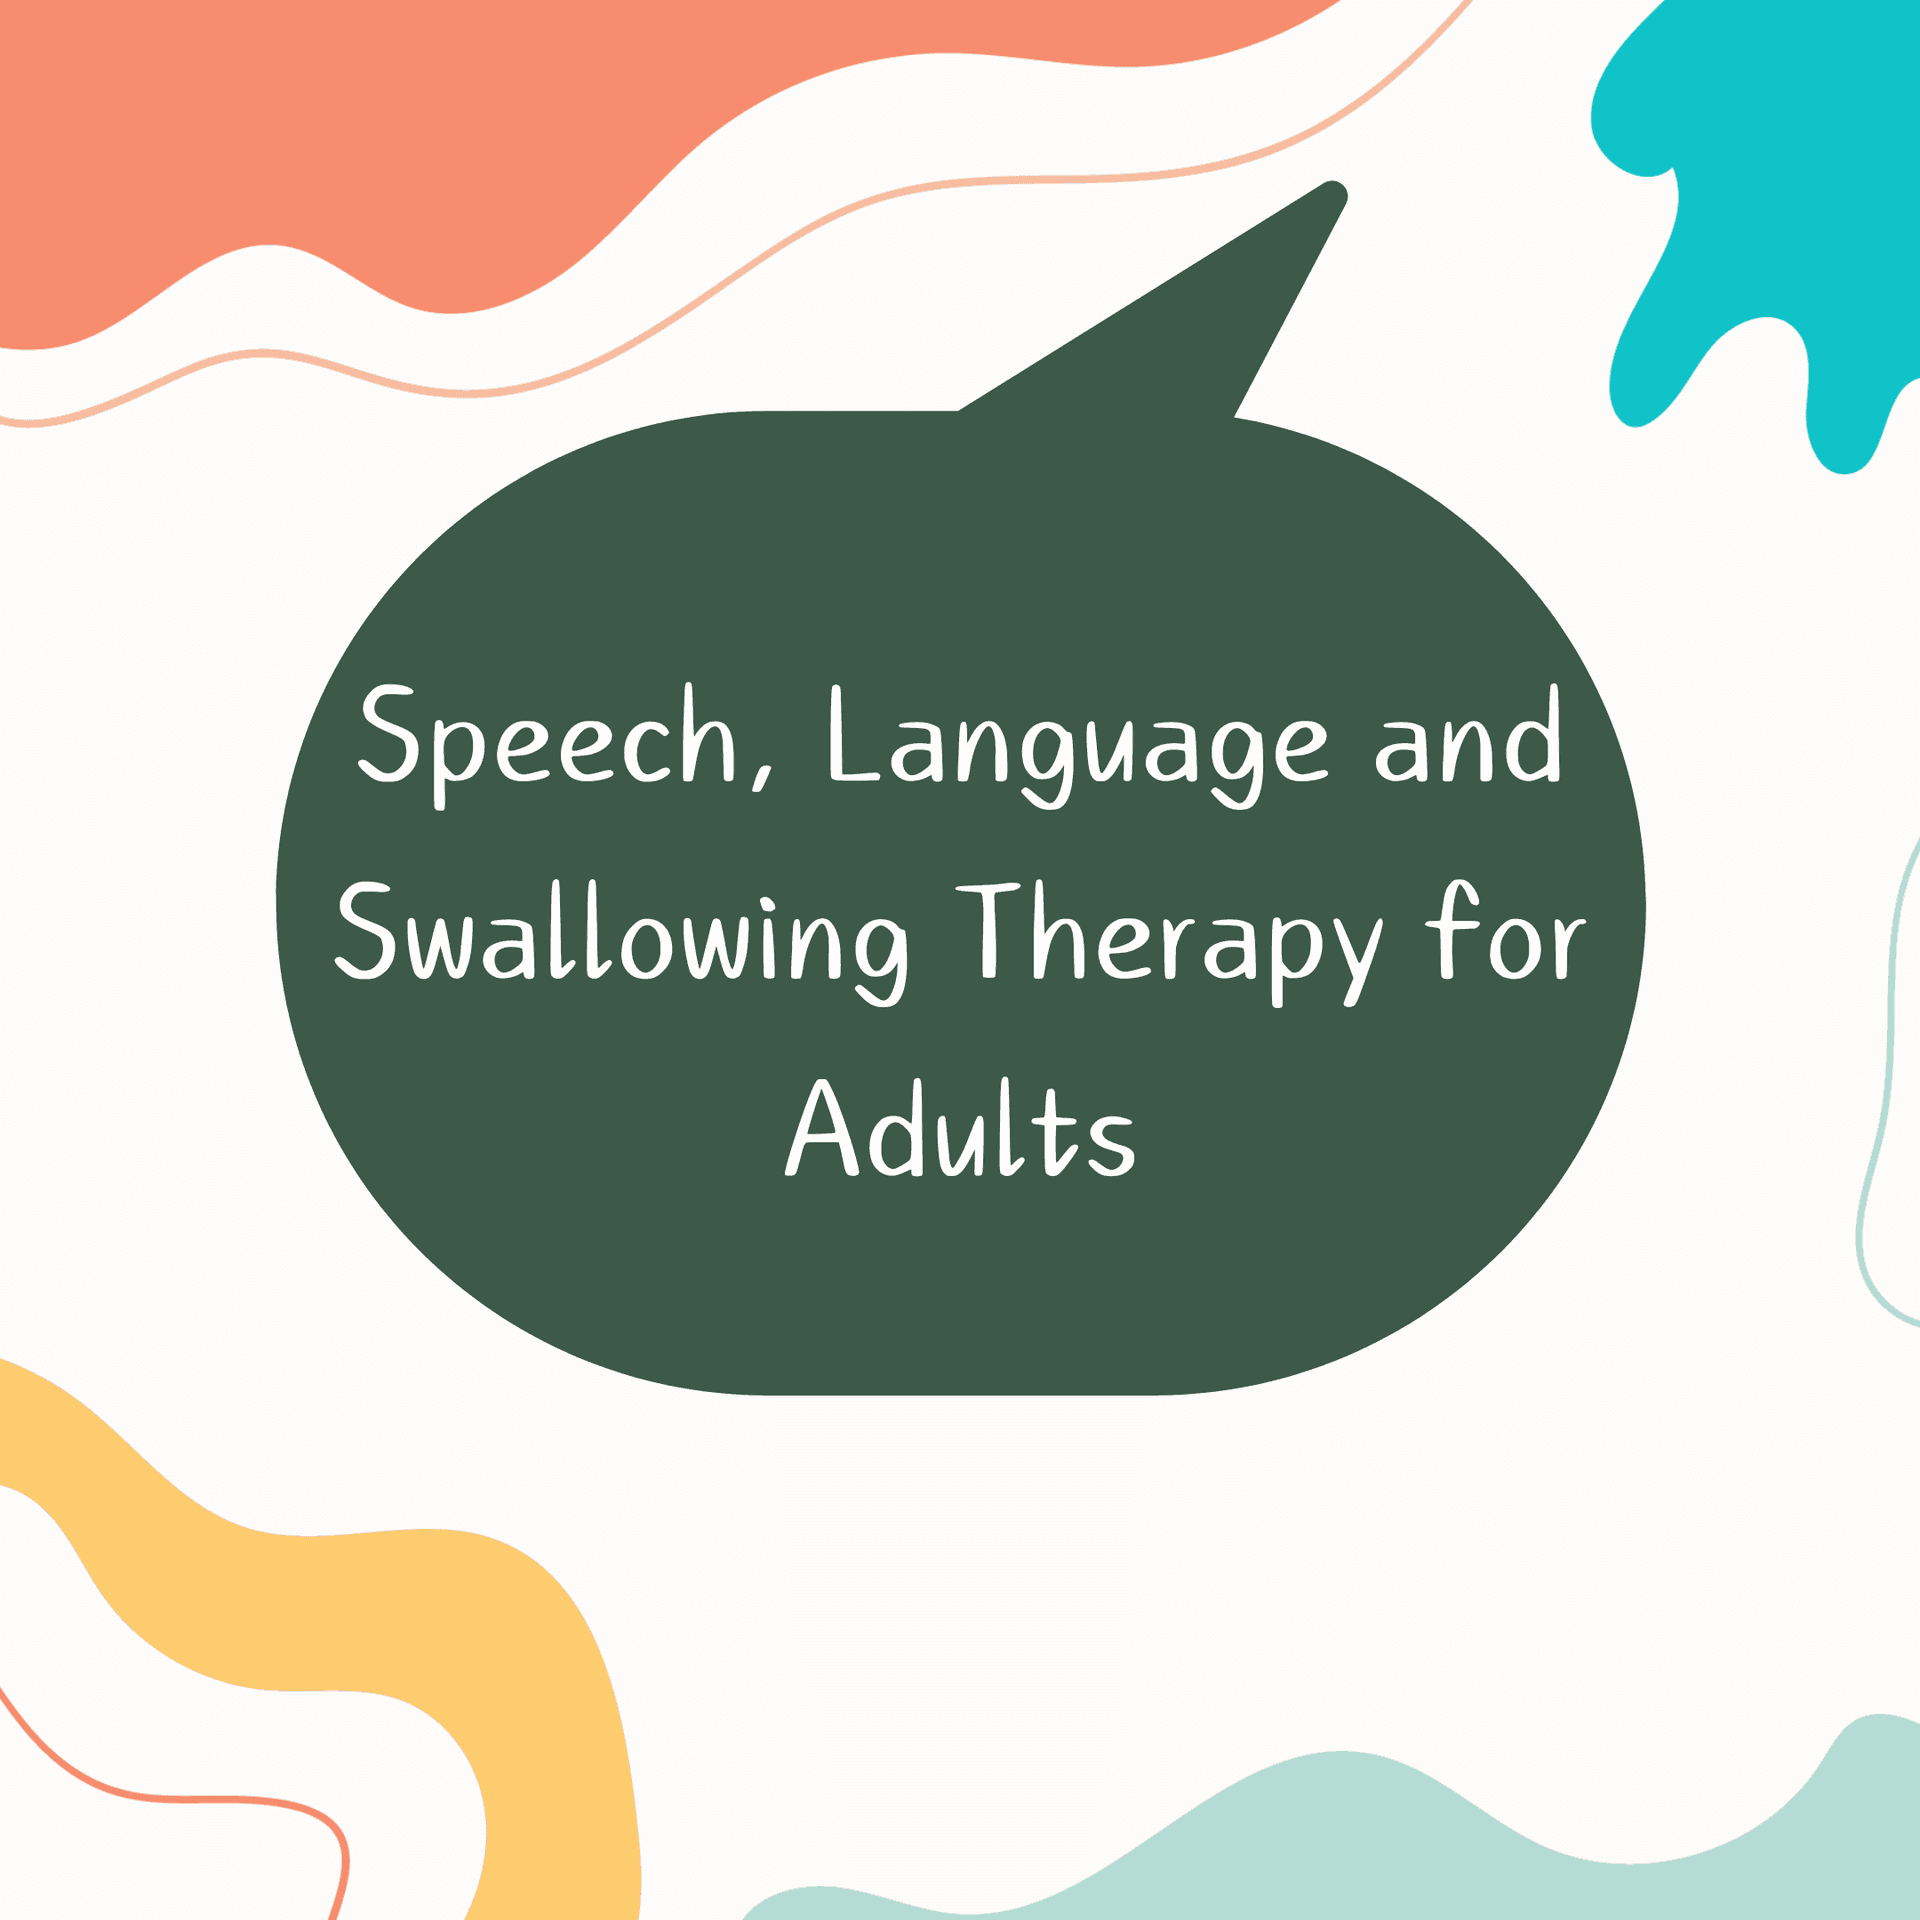 Speech, language and swallowing therapy for adults